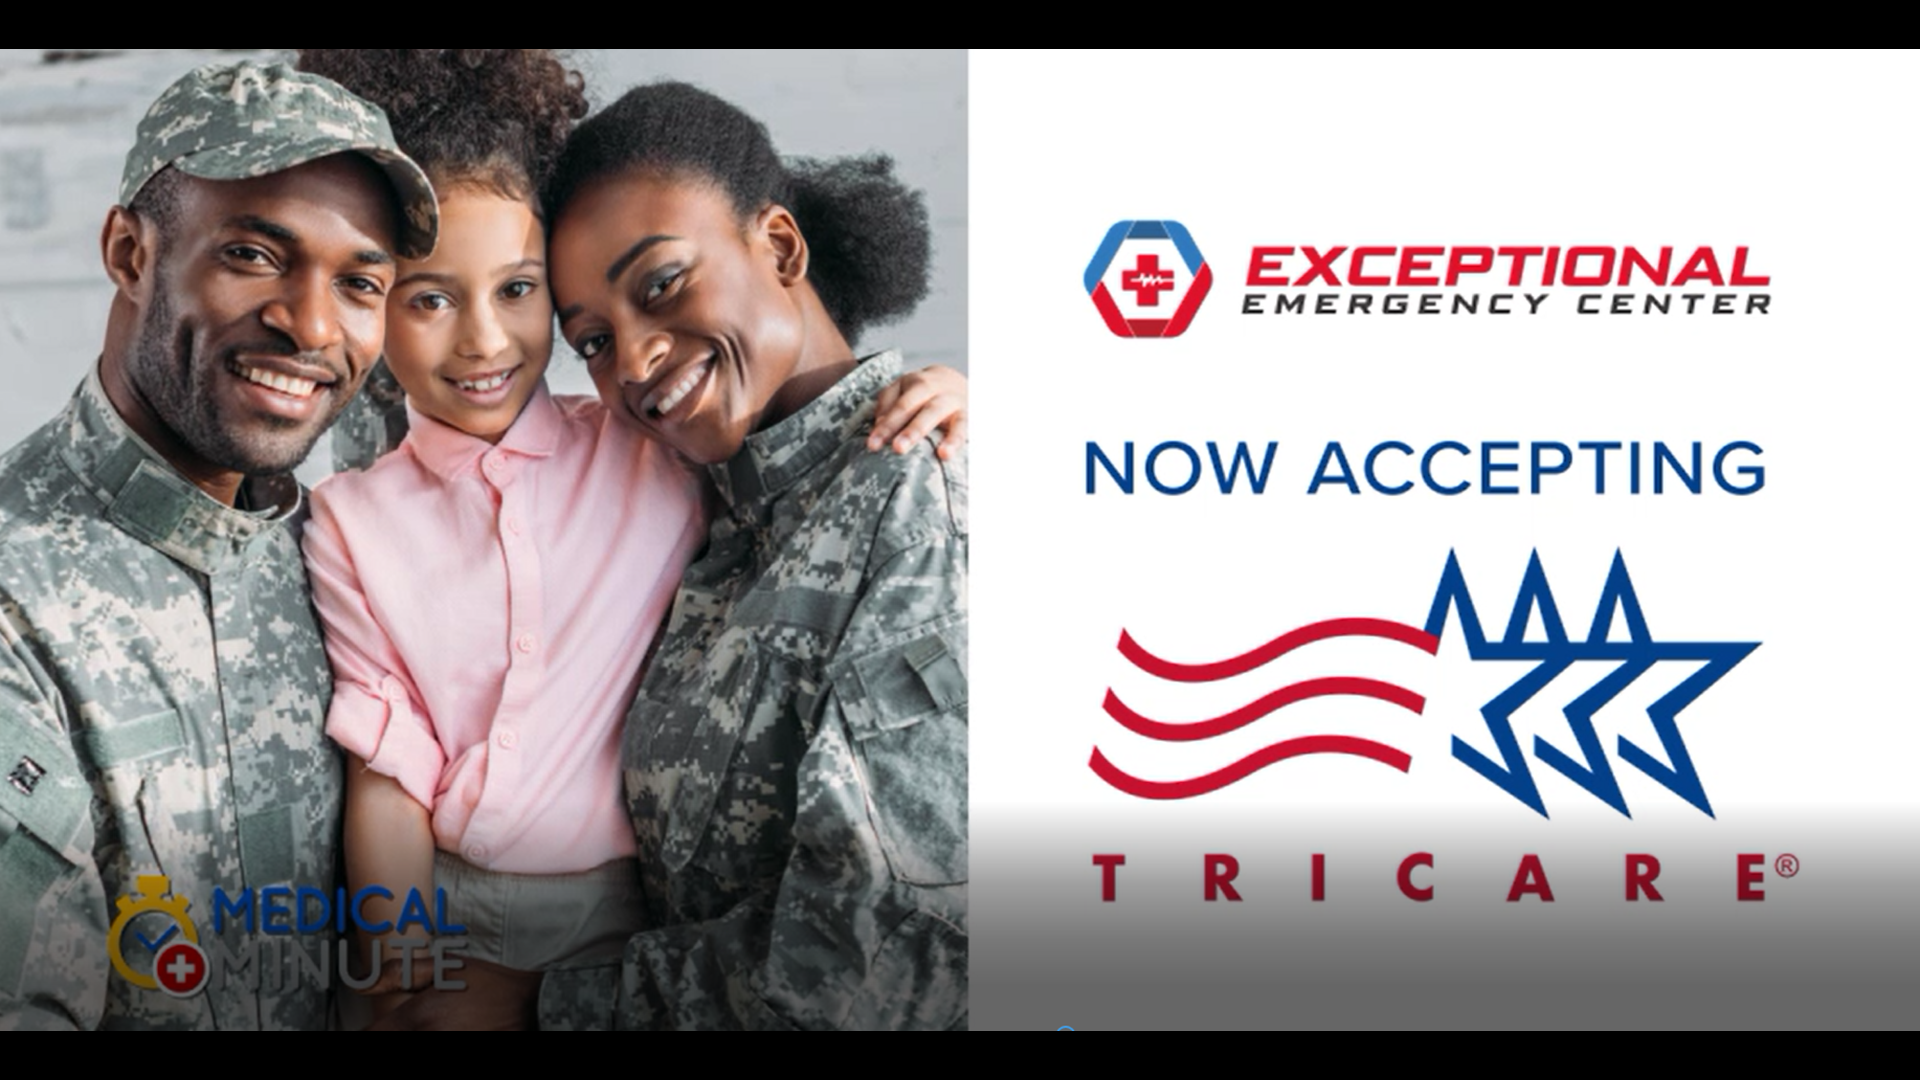 Exceptional Emergency Centers now accepting TRICARE for uniformed service members, retirees and their families.